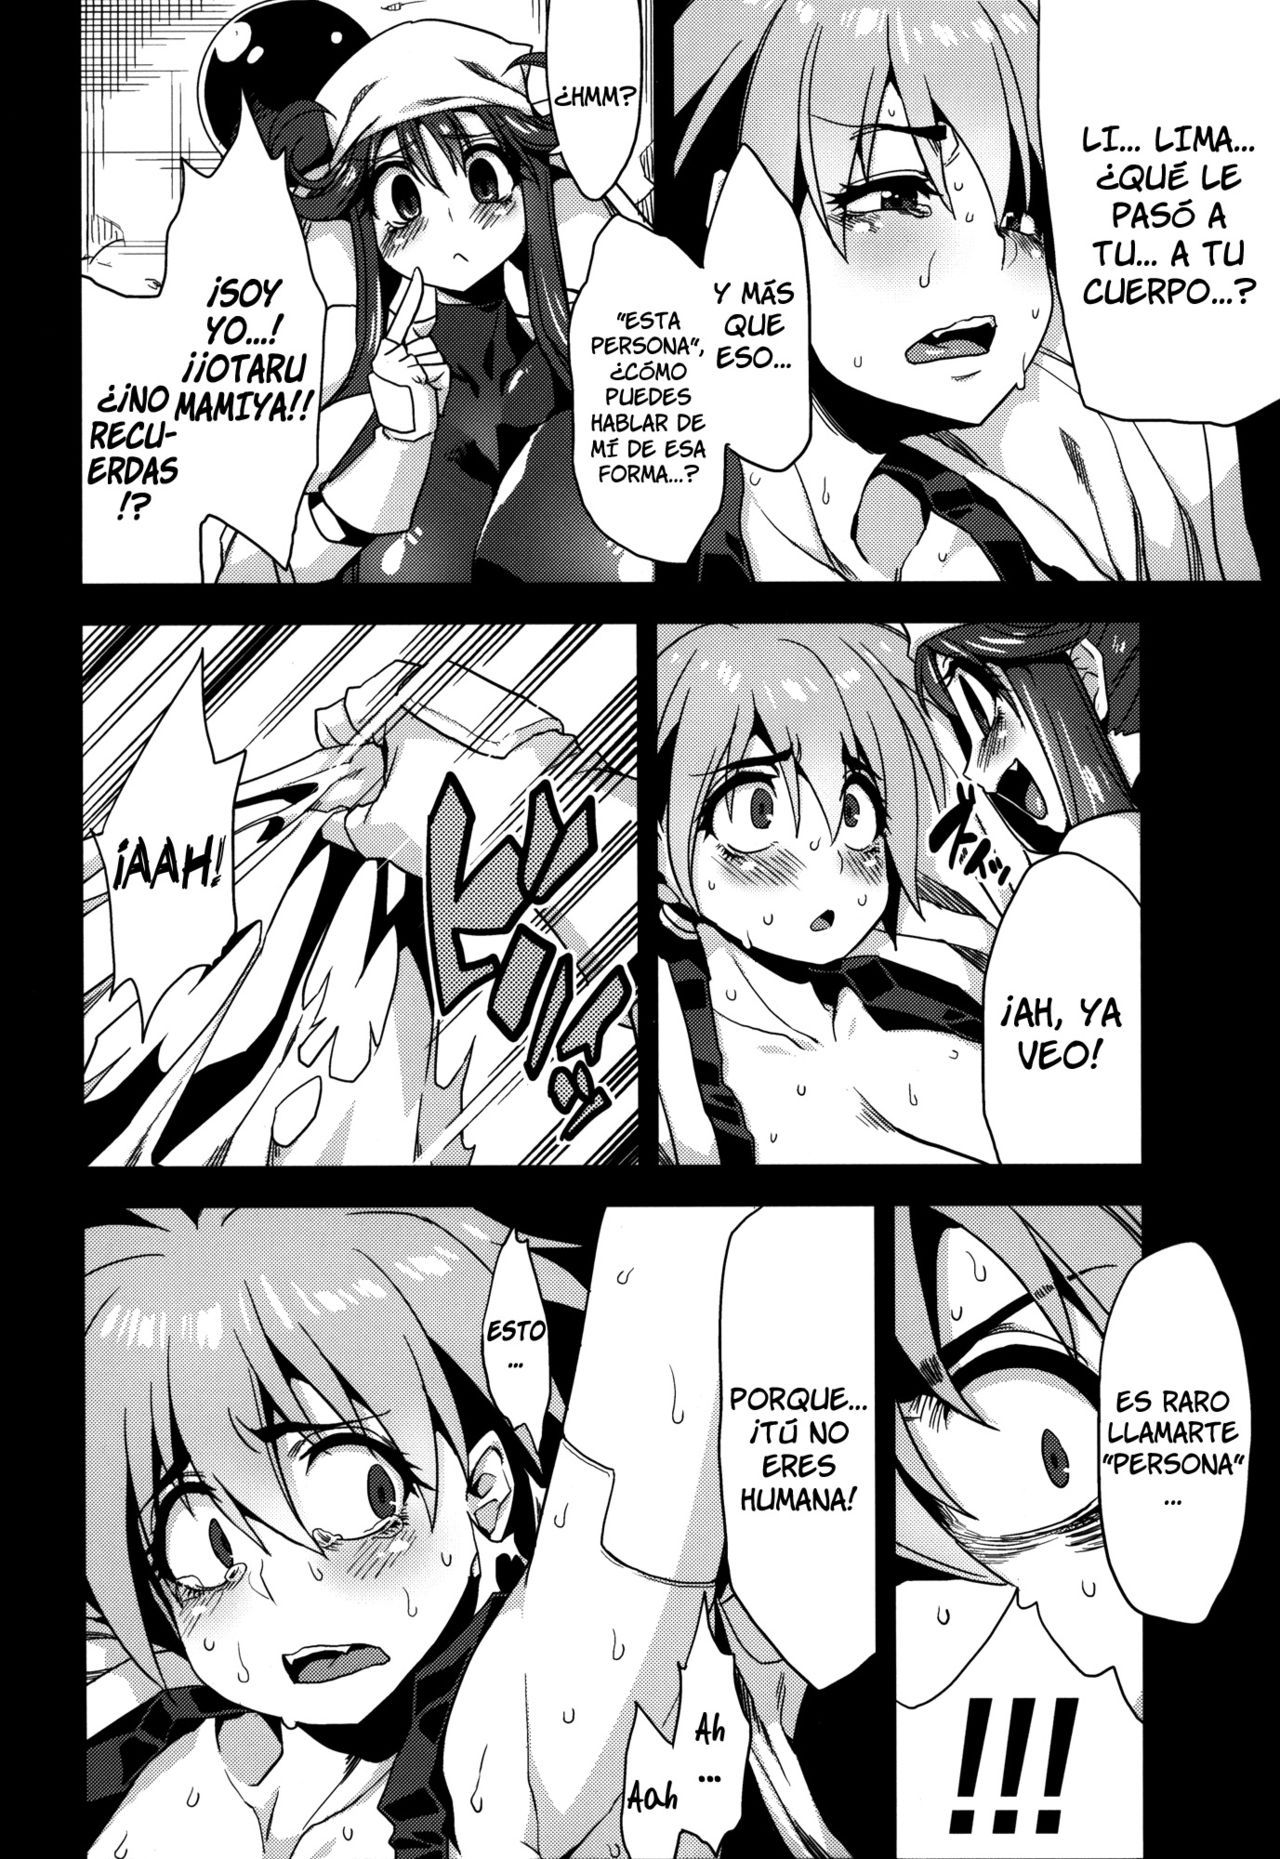 Hentai Marionette 3 (Saber Marionette X to J) - Capitulo 01 - 4